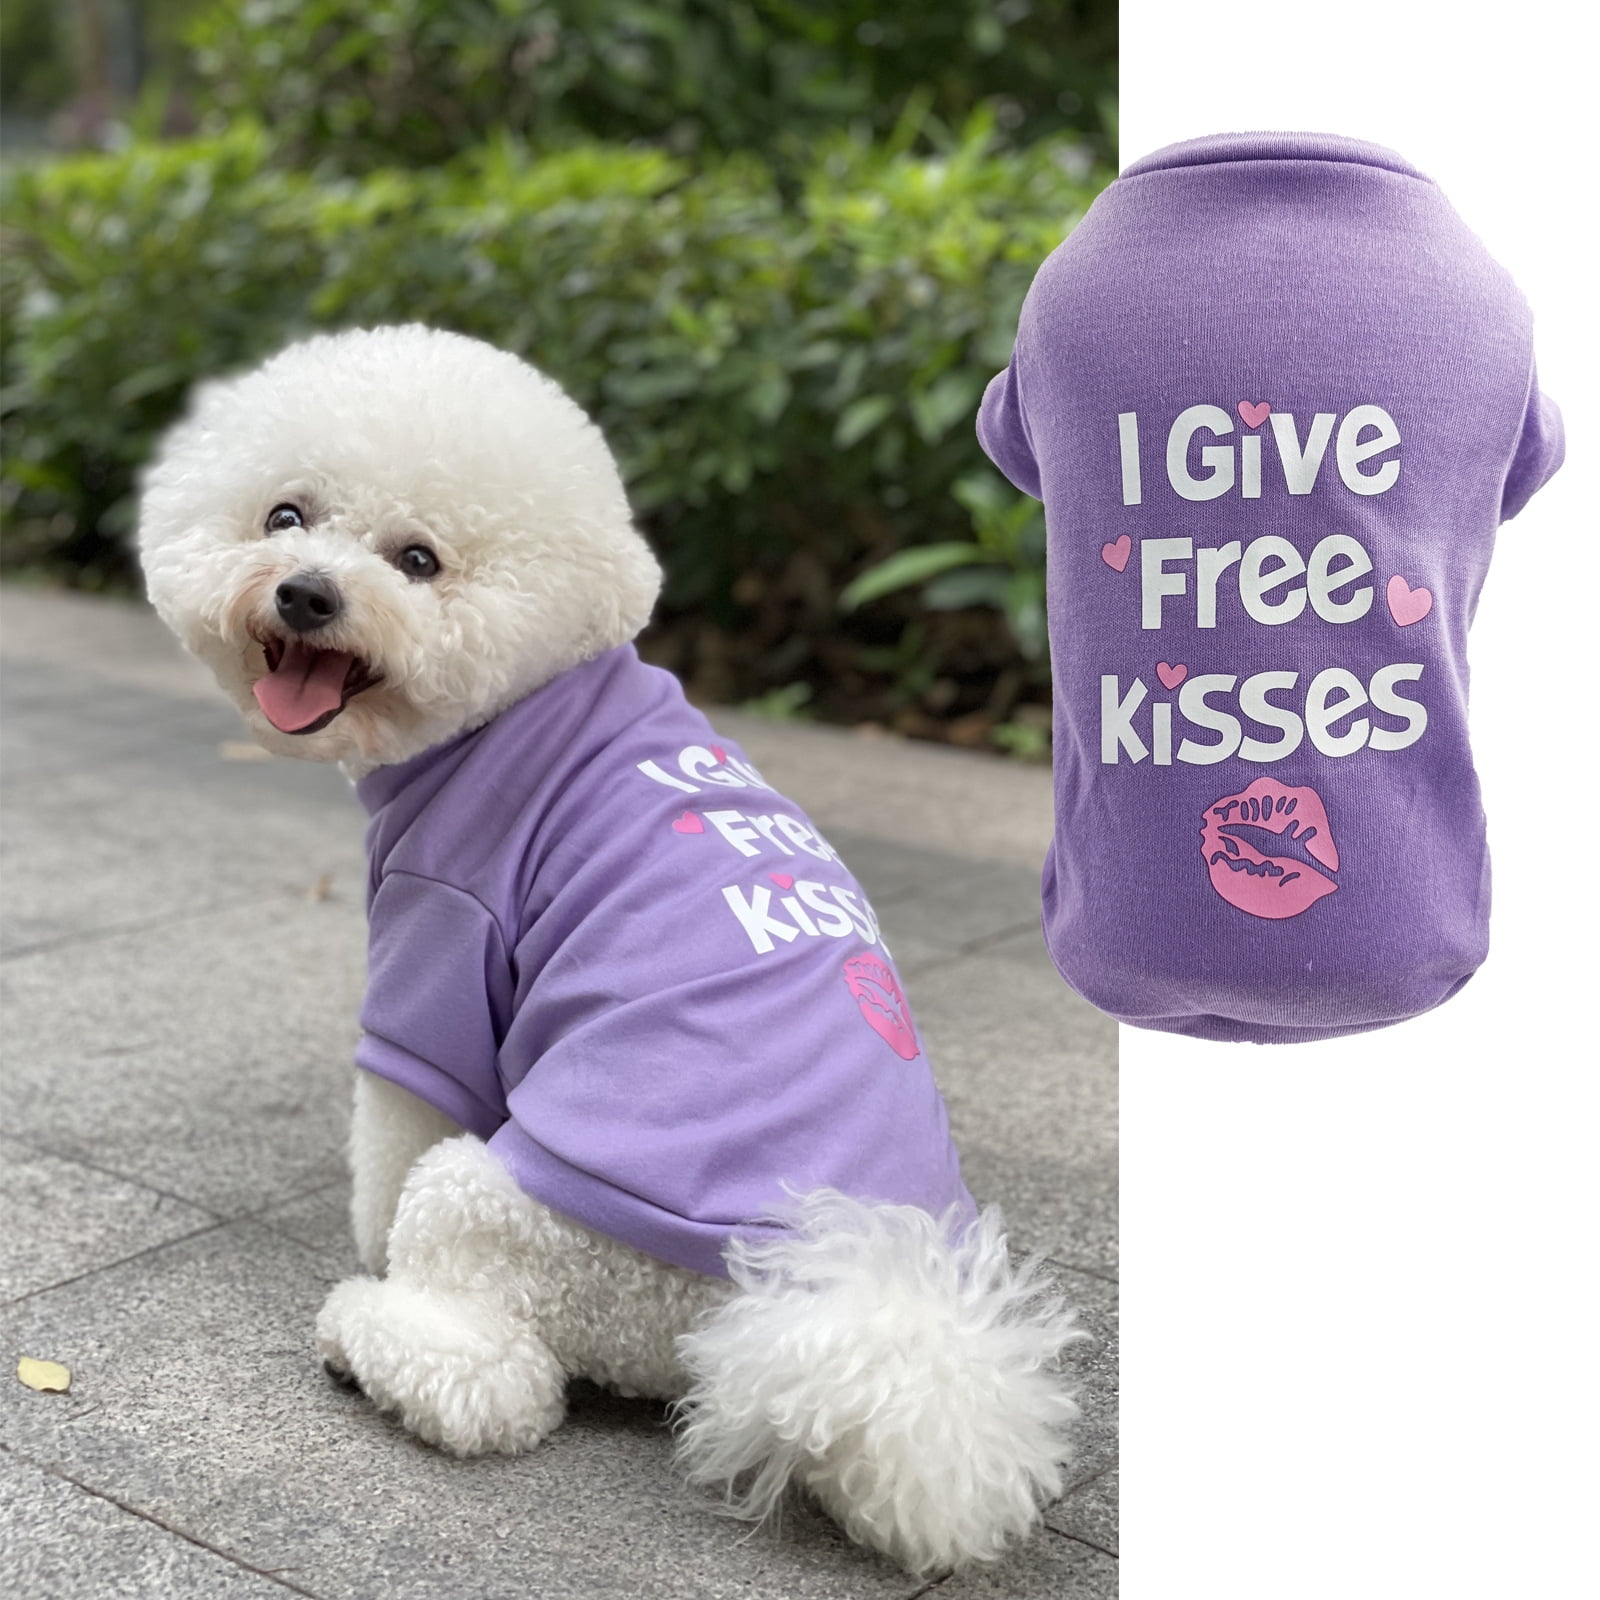 Pet Shirts Dog Shirt Breathable Sun Protection Clothing Thin Lightweight Dog Vest Air Conditioning Clothing Dog Sun-Proof Clothing Dog T-Shirt Cat Small and Medium Dog Puppy Clothes Teddy Bichon 